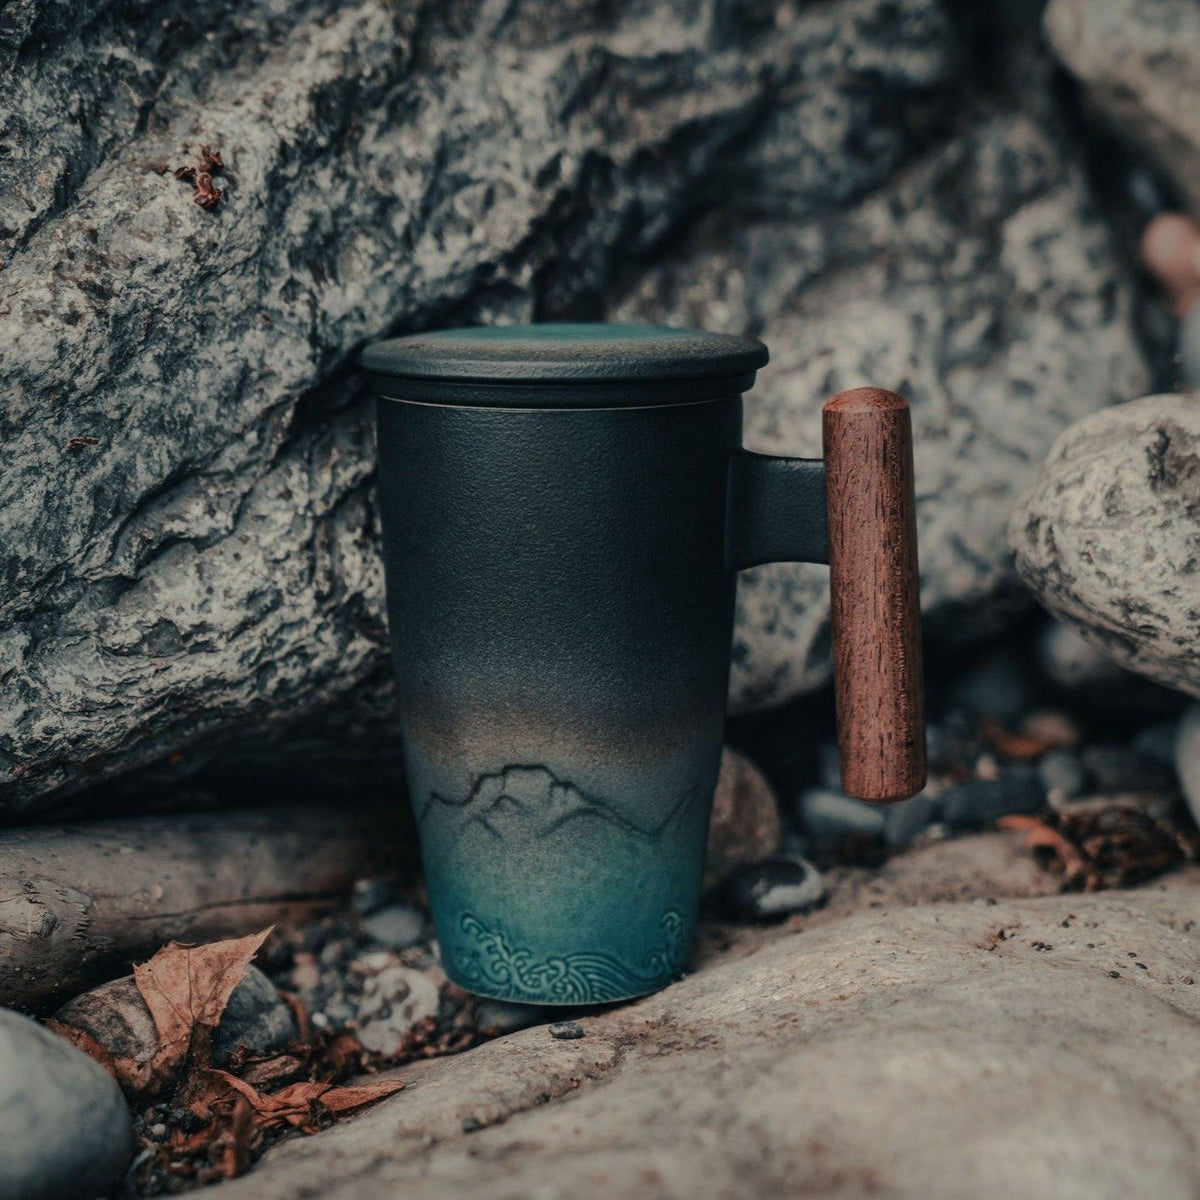 12 Unique and Handmade Coffee Mugs and Tea Cups To Elevate Your